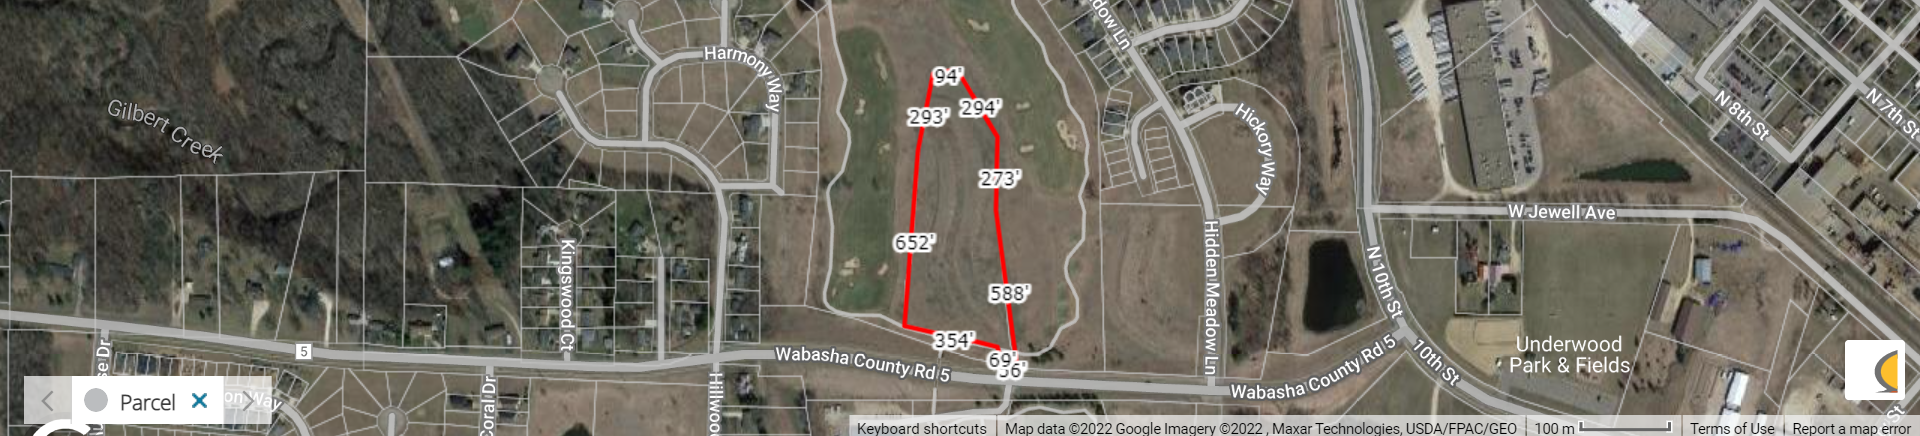 Property dimensions are highlighted. Wabasha Cty Rd 5 located at the bottom of the picture